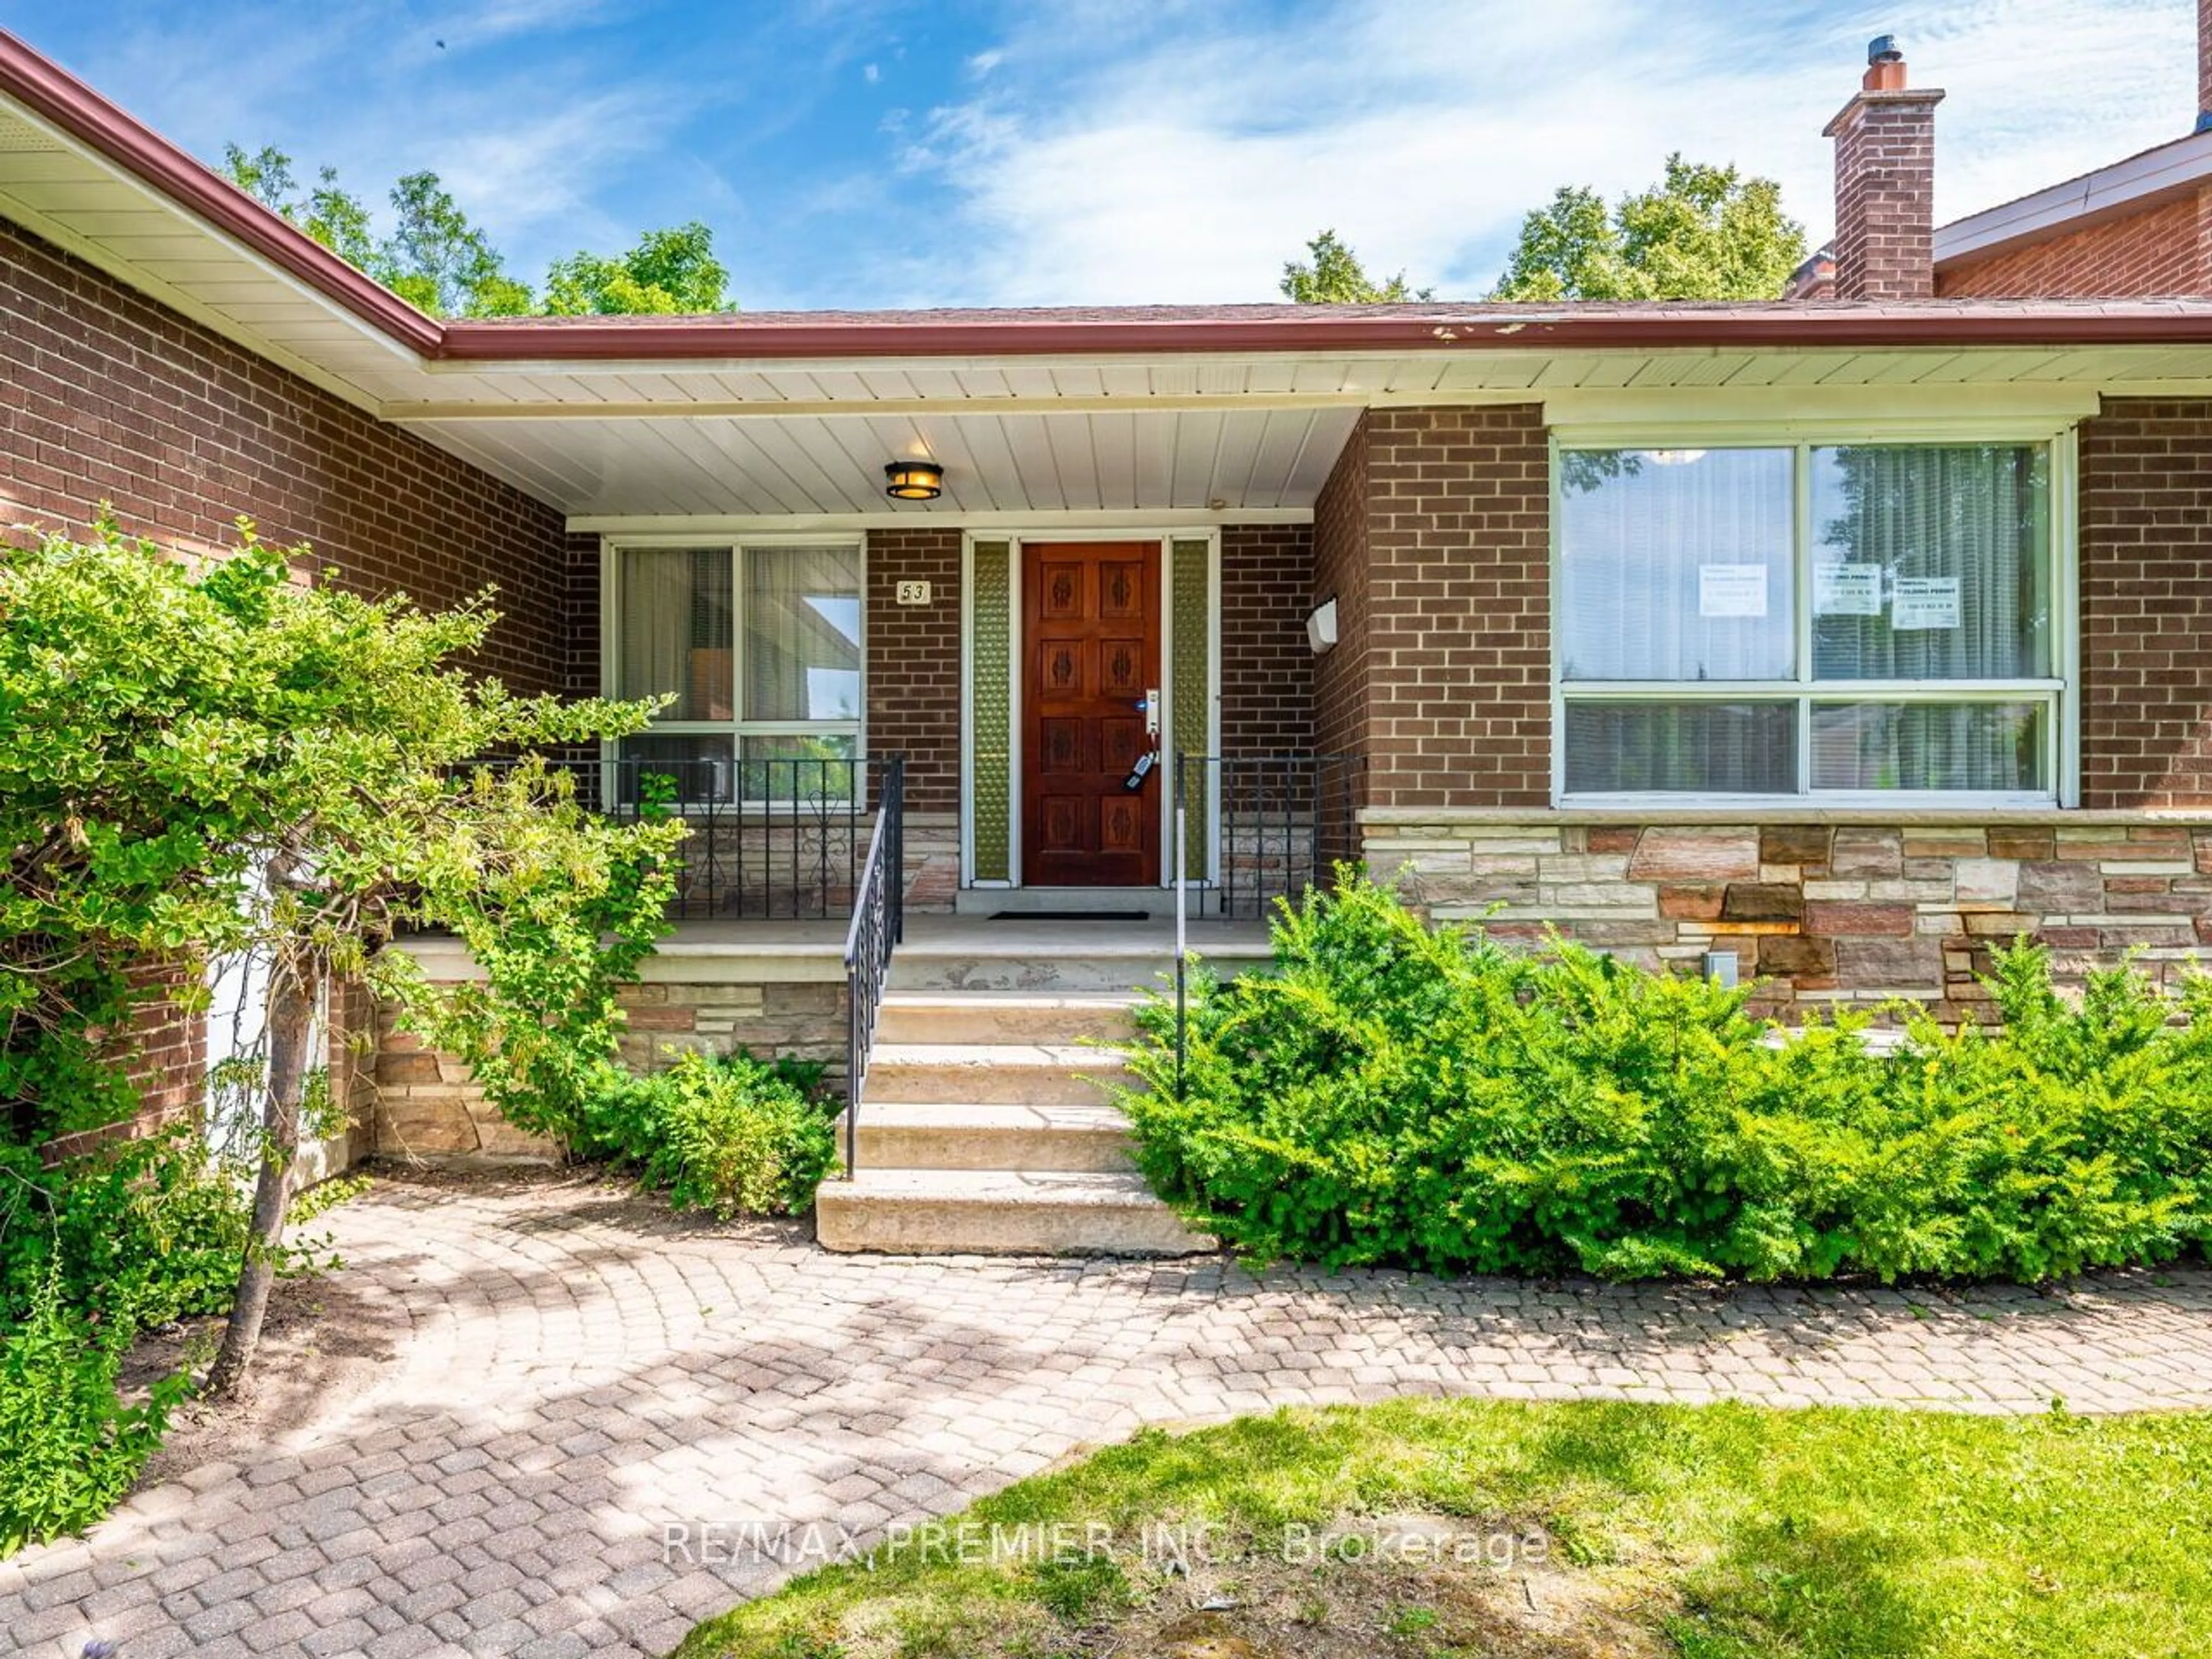 Home with brick exterior material for 53 Thicket Rd, Toronto Ontario M9C 2T4